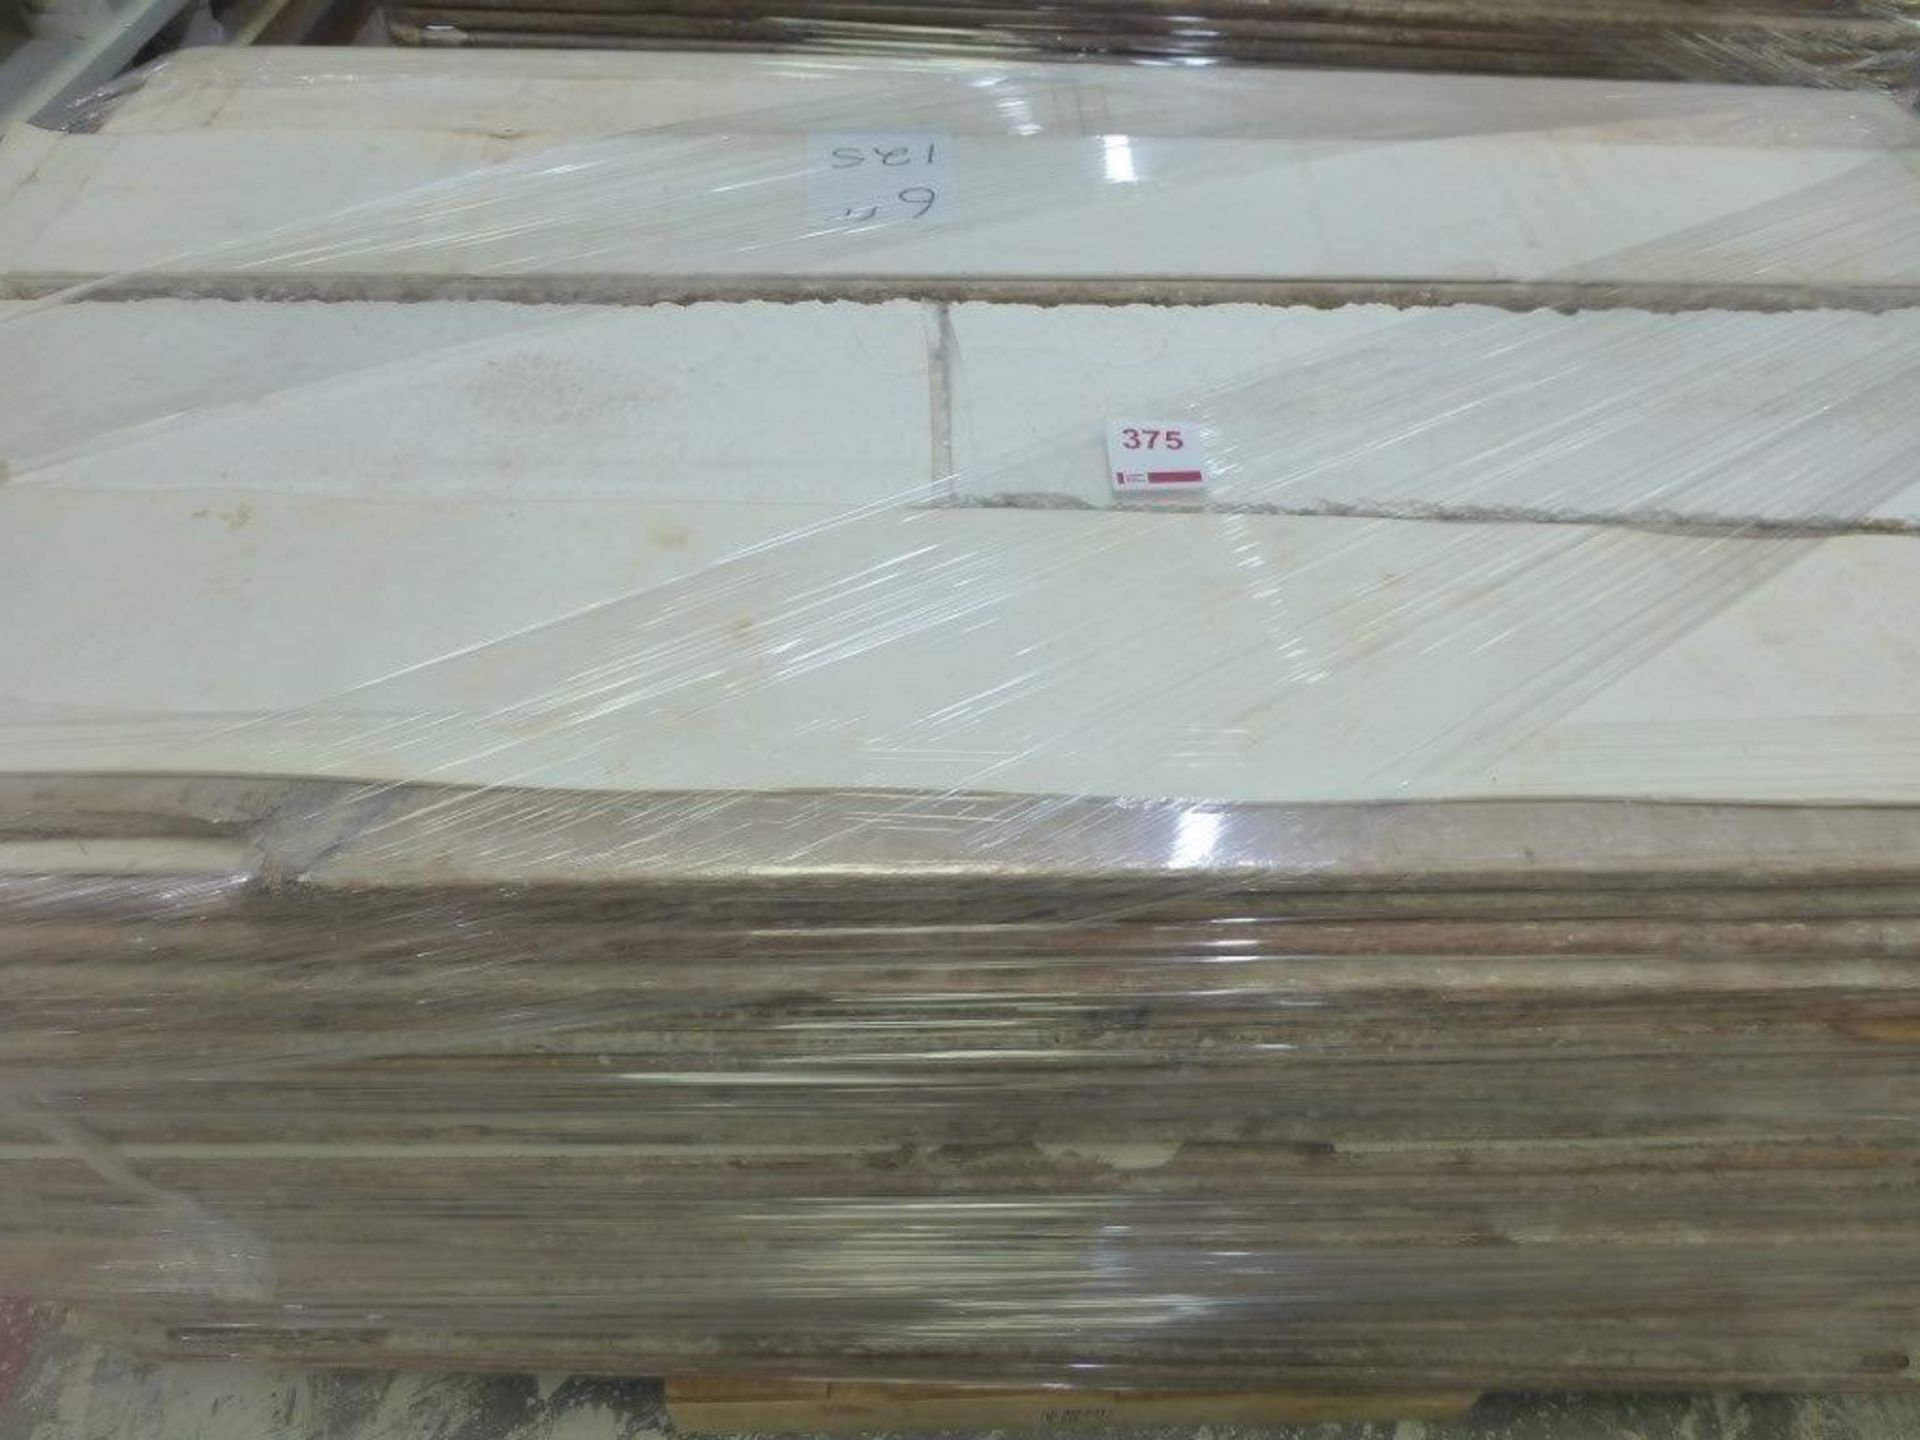 125 x 6' ware boards on one pallet